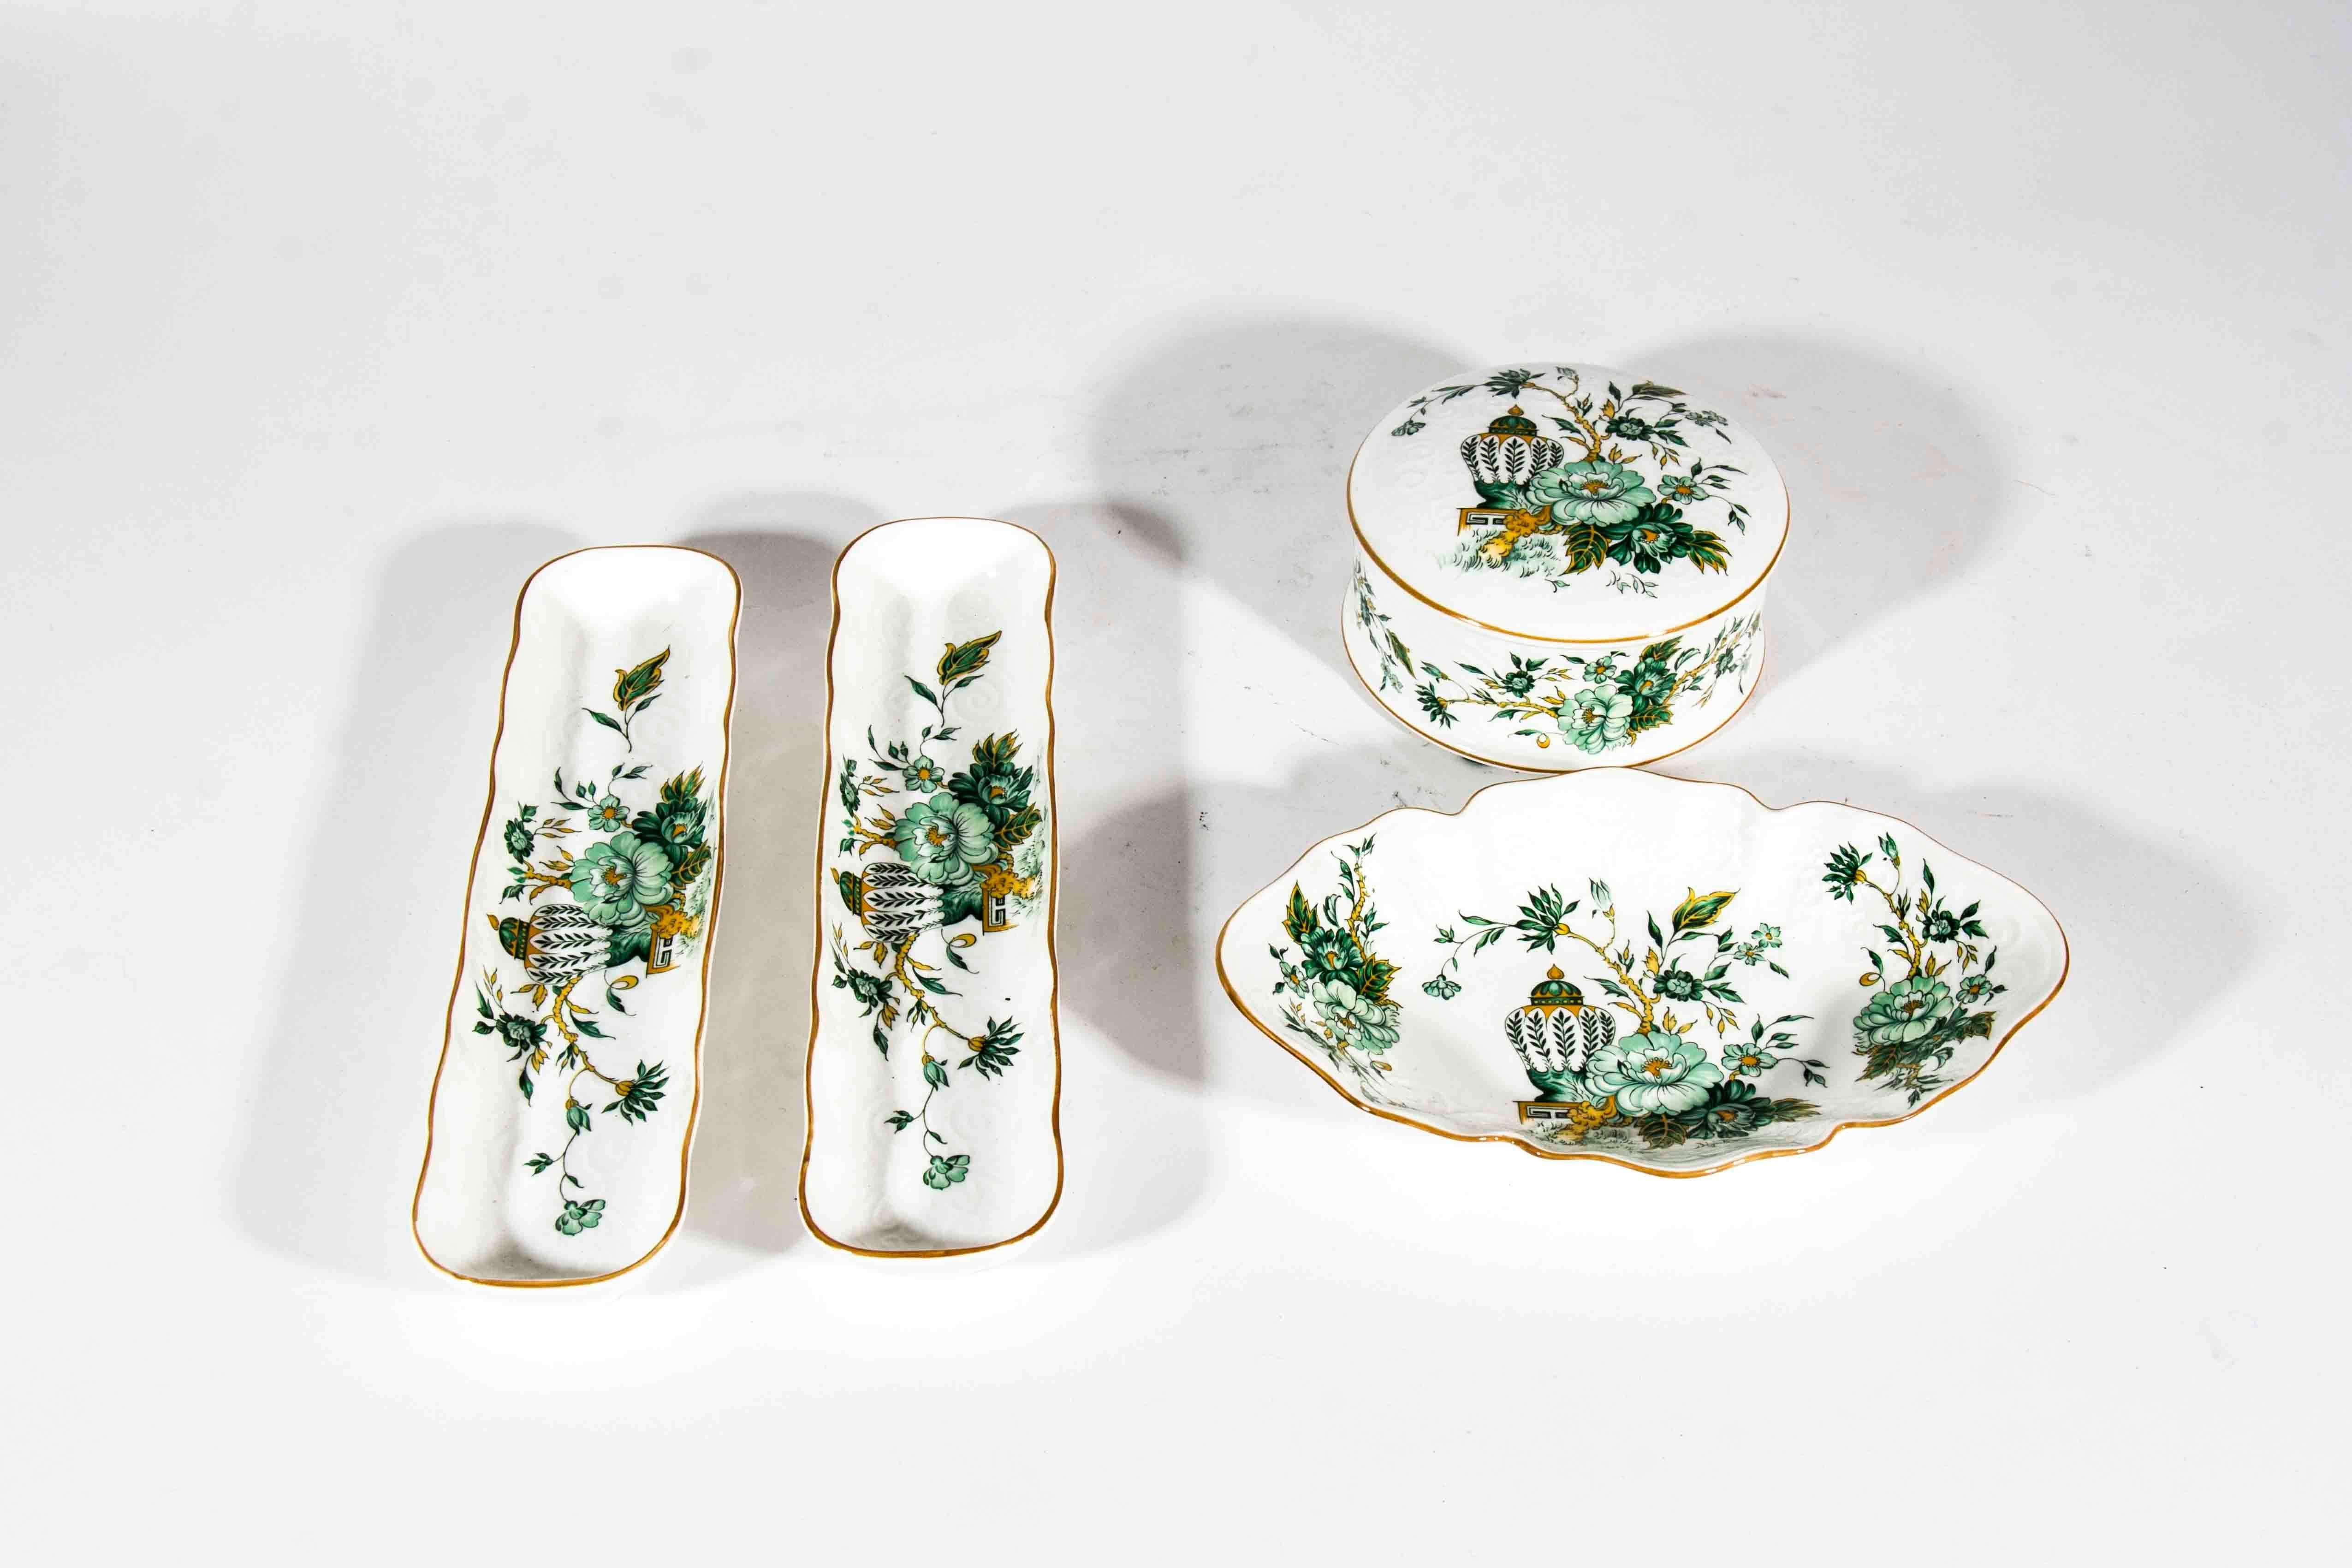 Vintage porcelain chinoiserie vanity set in excellent condition. Five pieces. The canister measures 4